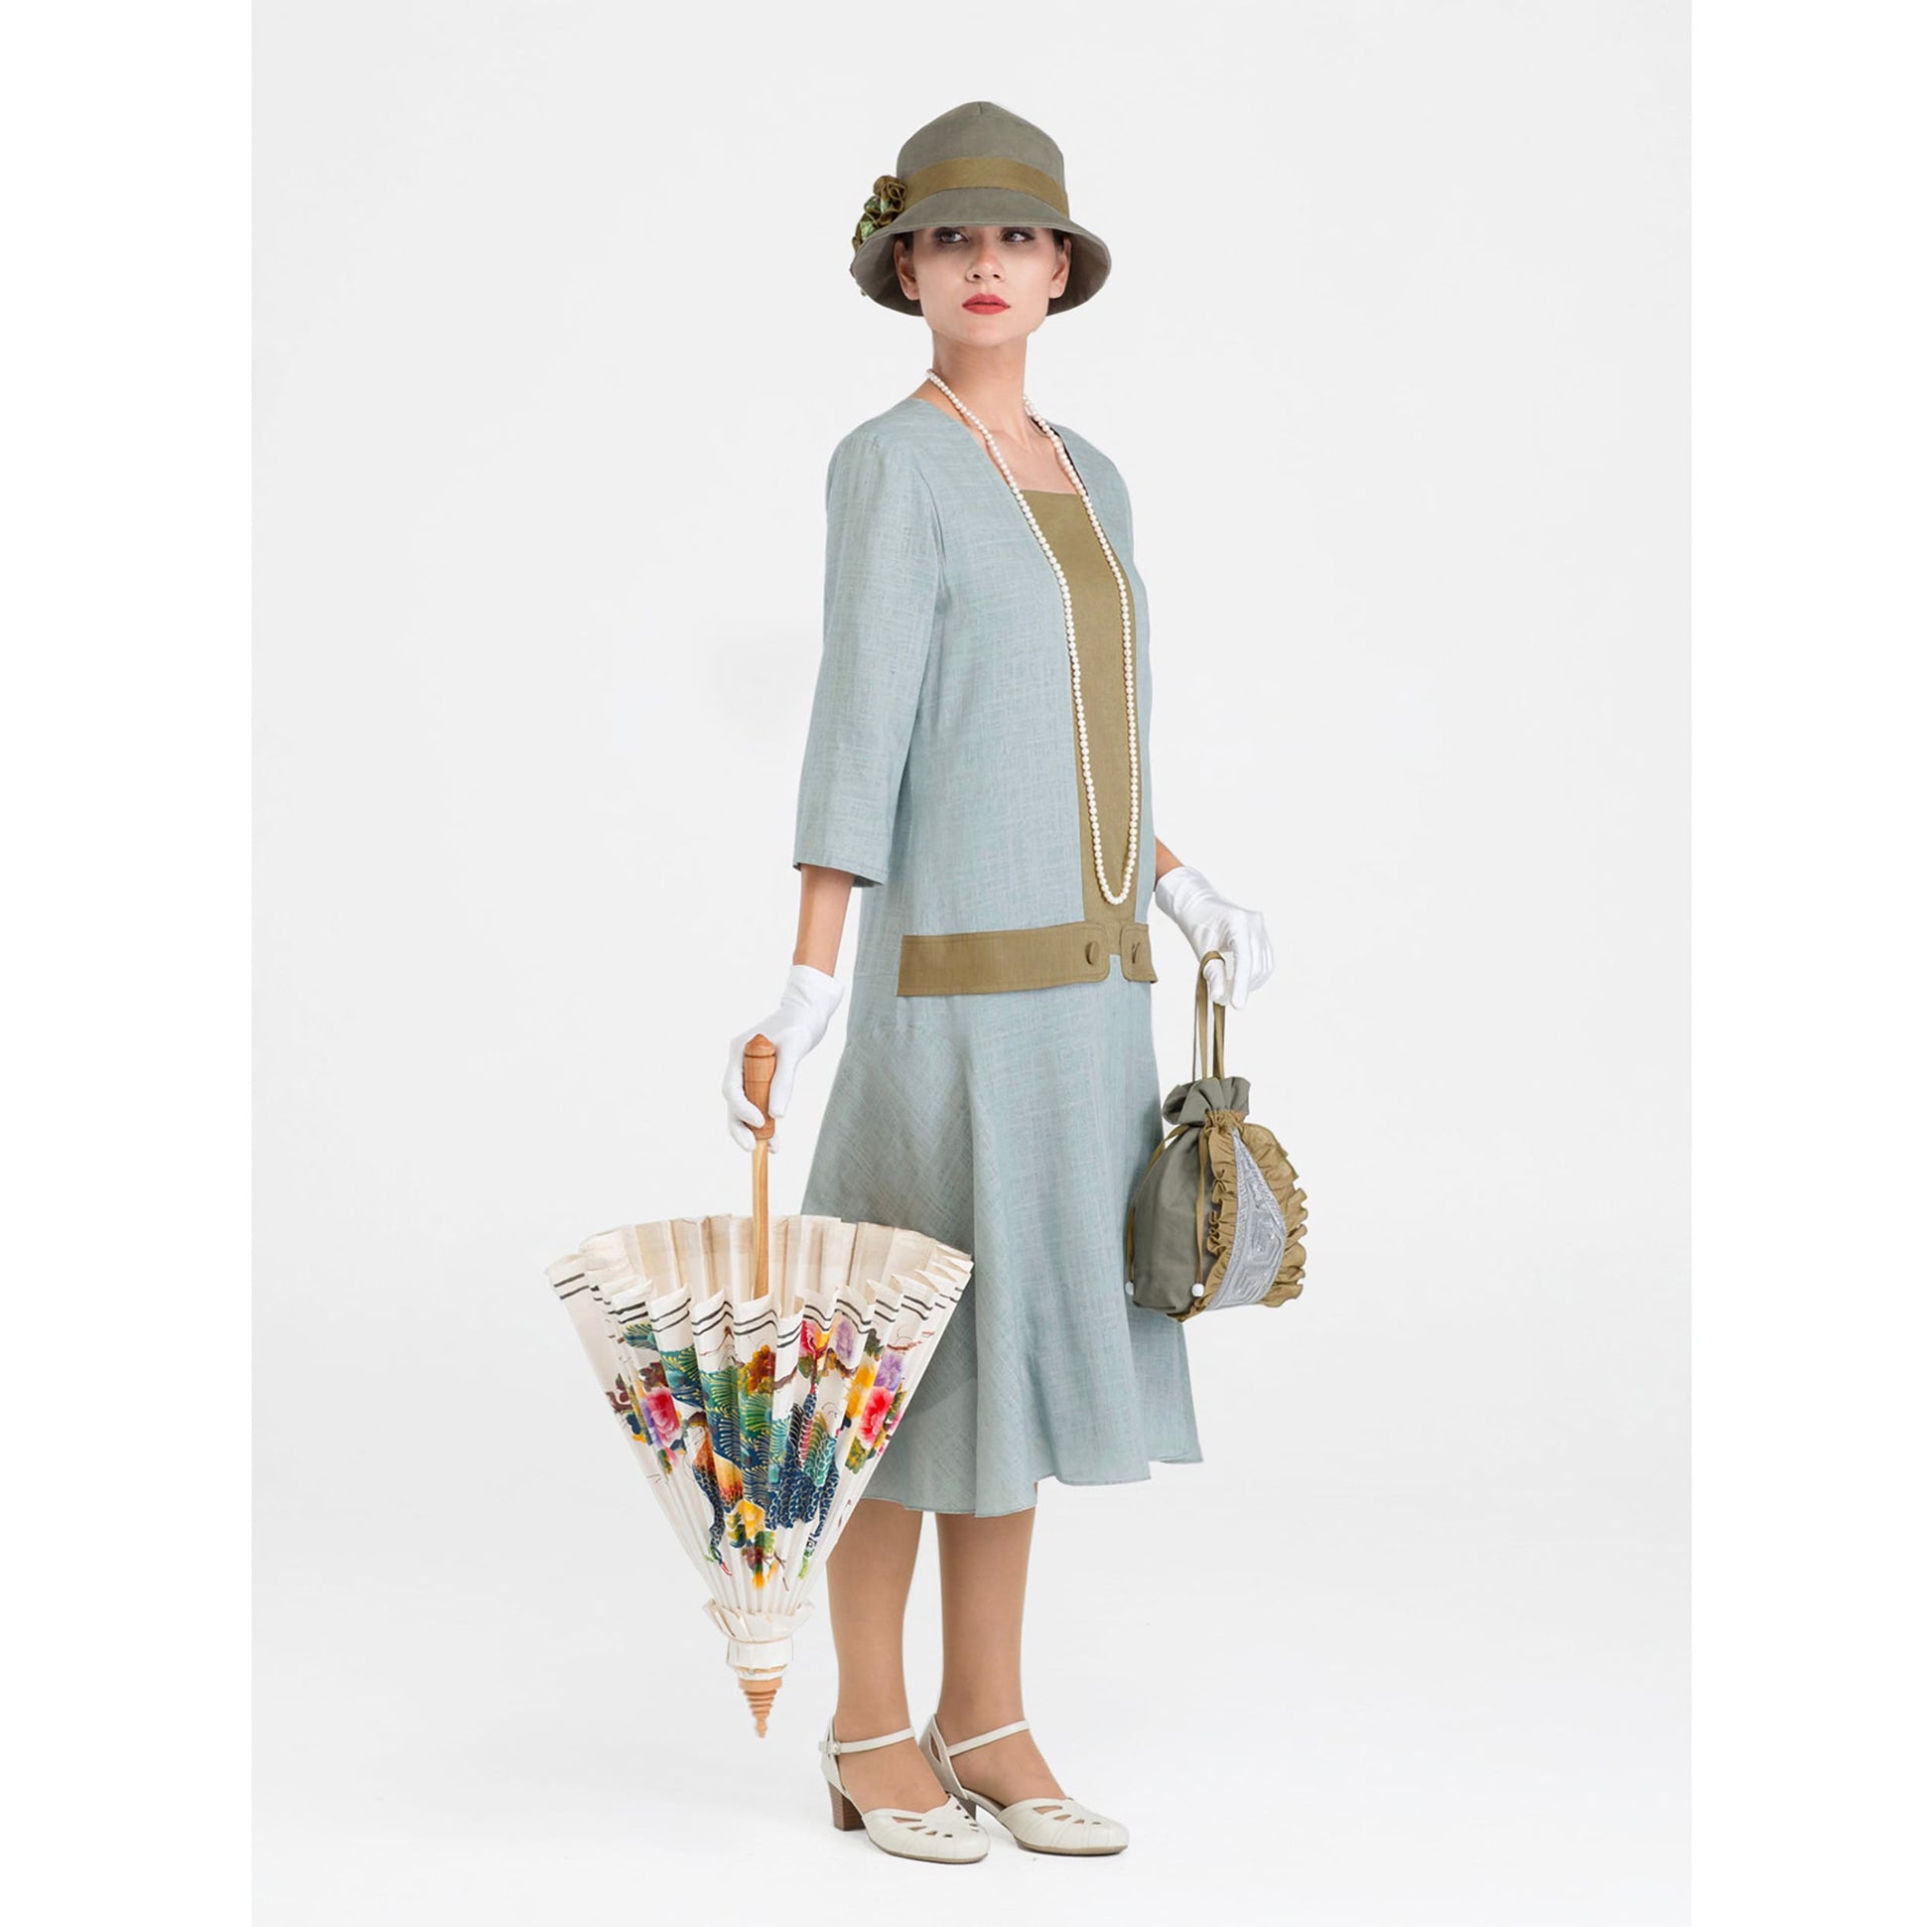 A Great Gatsby day dress made of quality linen fabric in light slate grey with olive green contrast details.